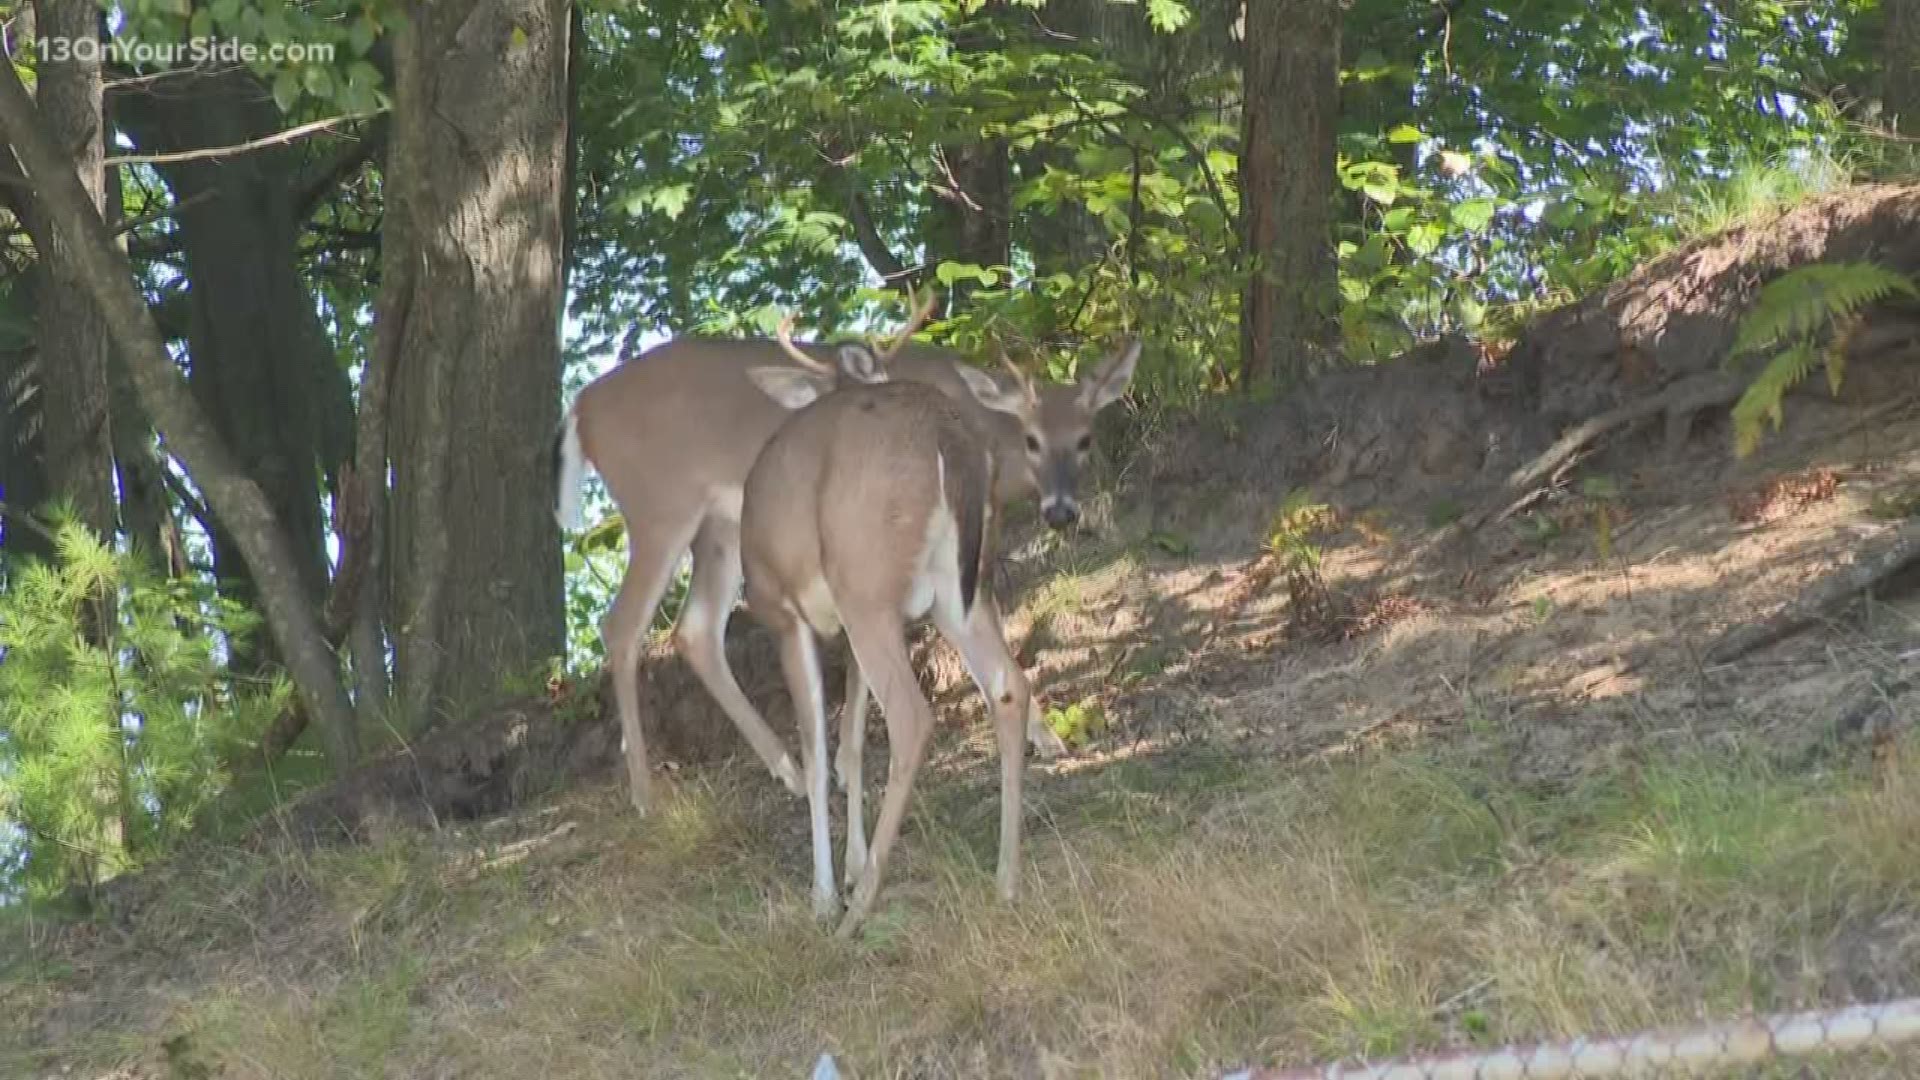 Muskegon City Commission approved a deer cull to help curb the deer population.